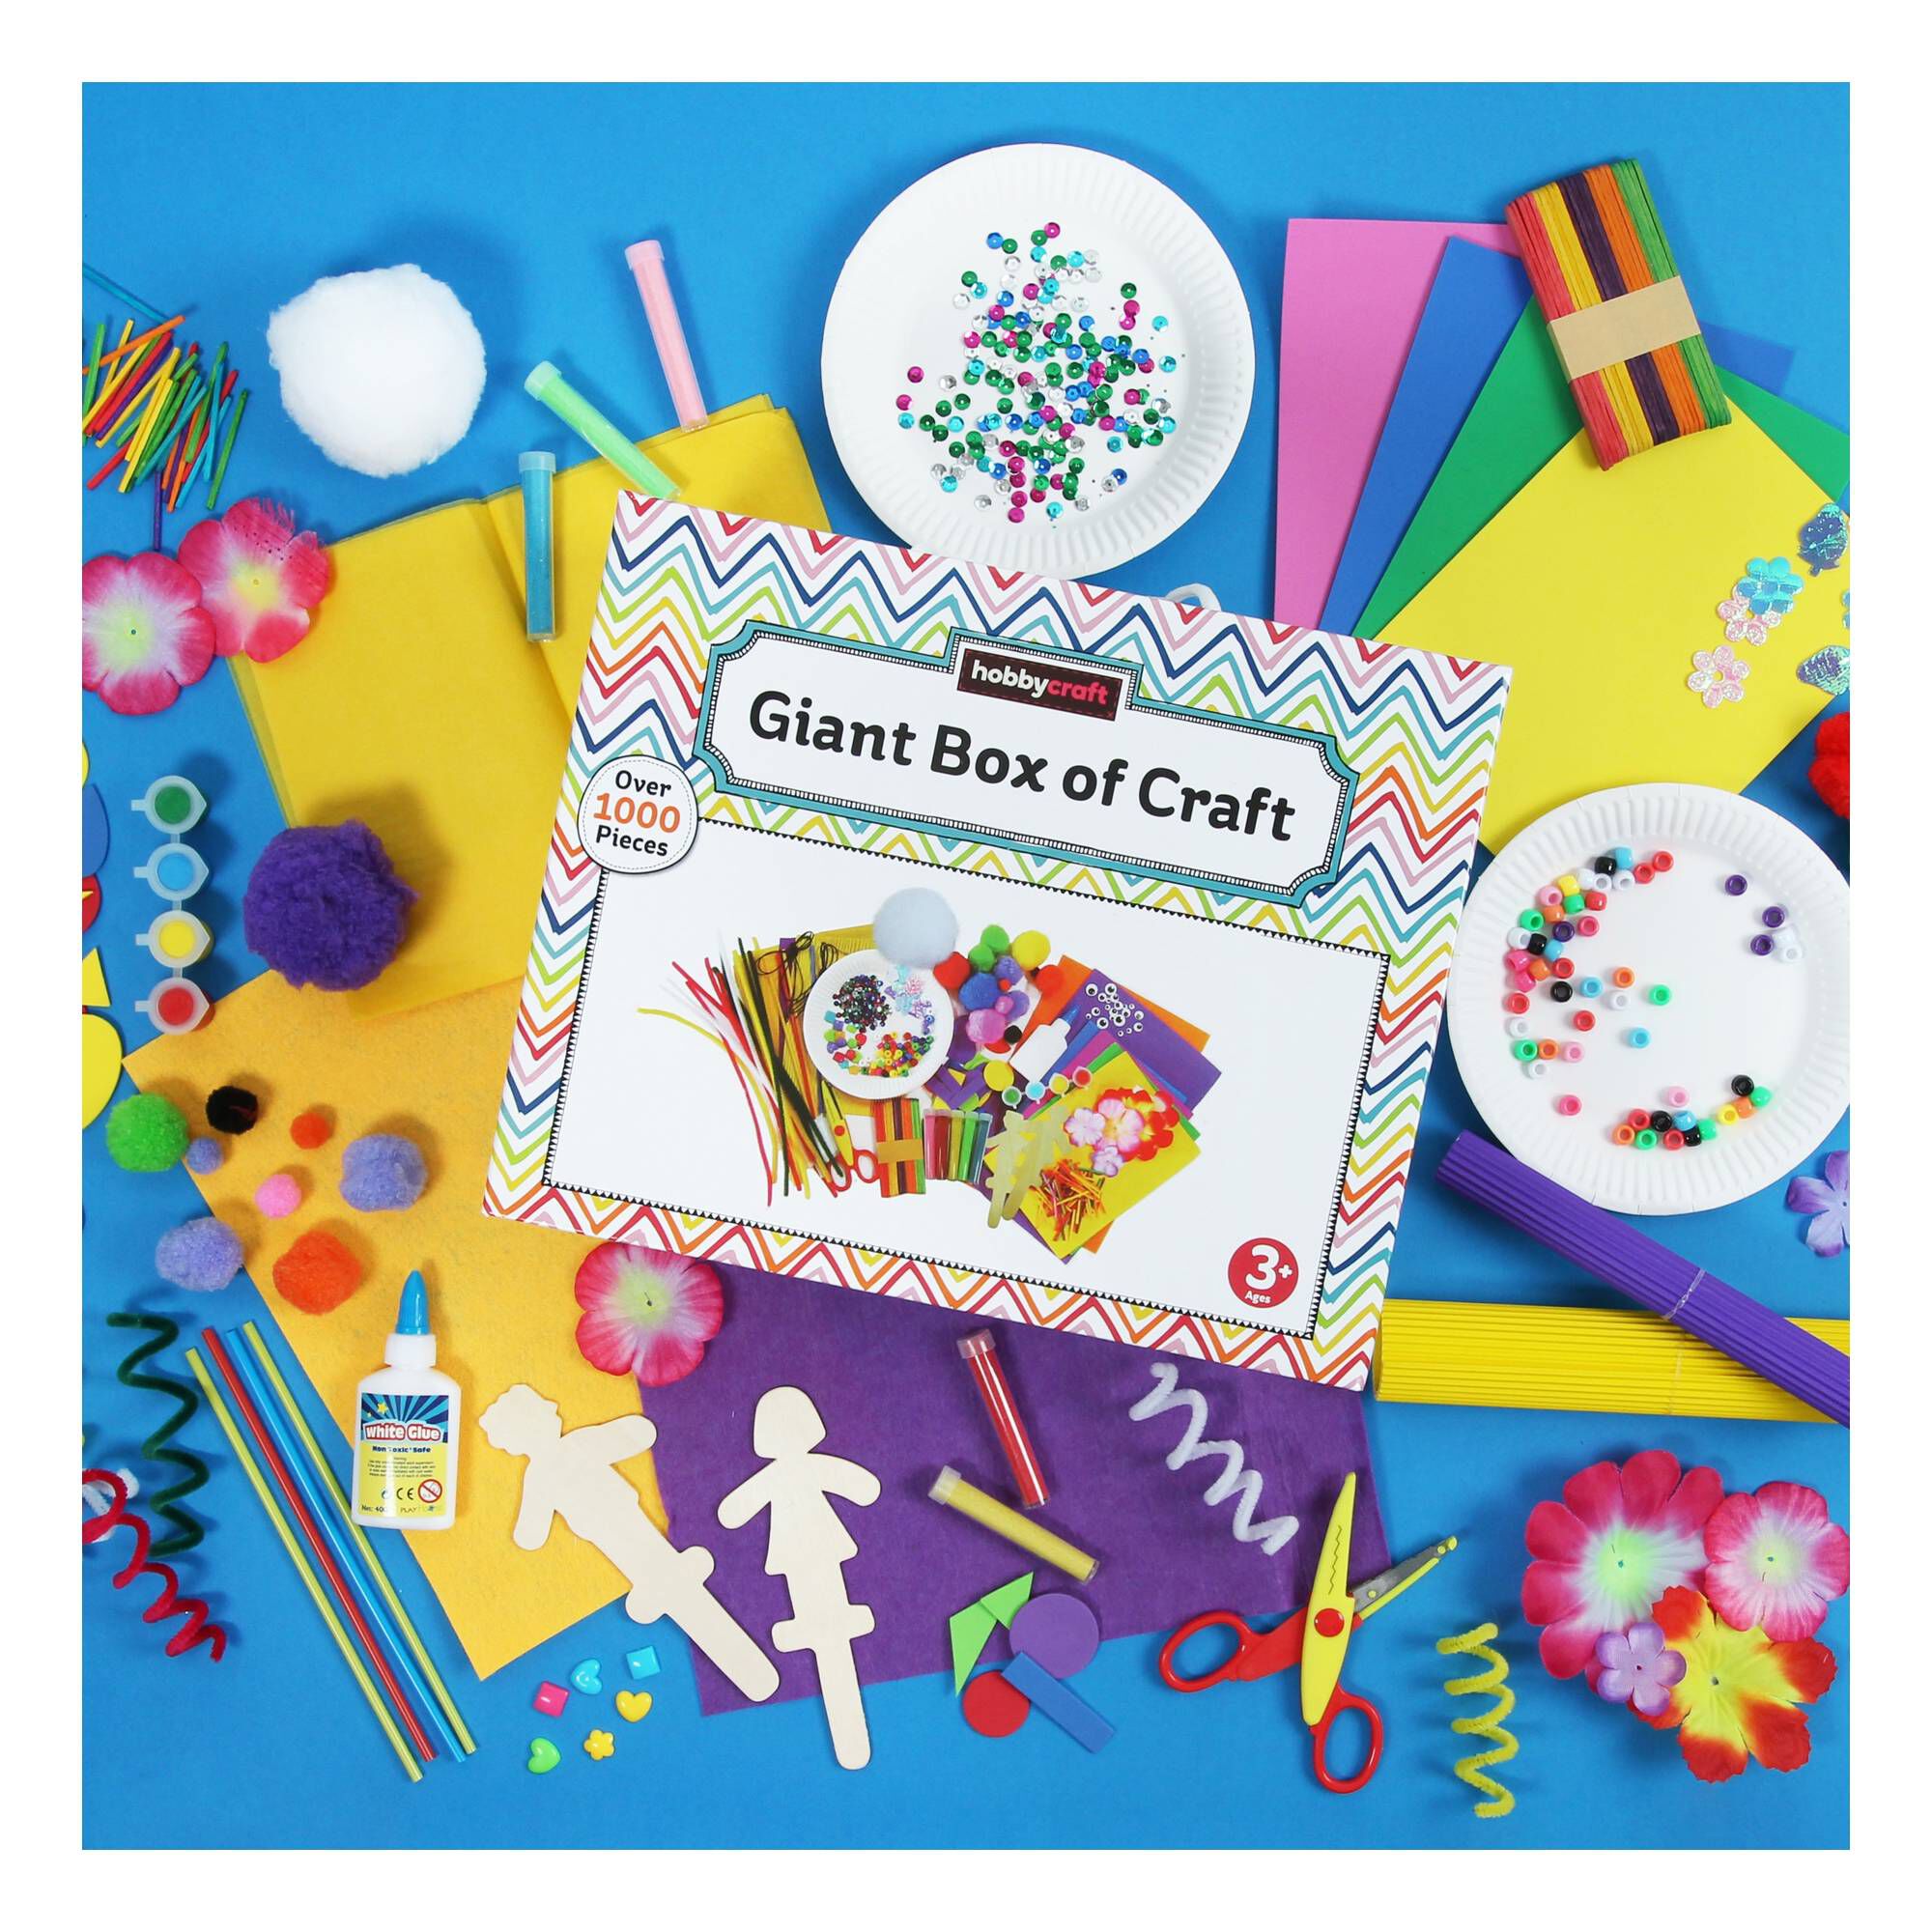 Giant Box of Craft 1000 Pieces | Hobbycraft